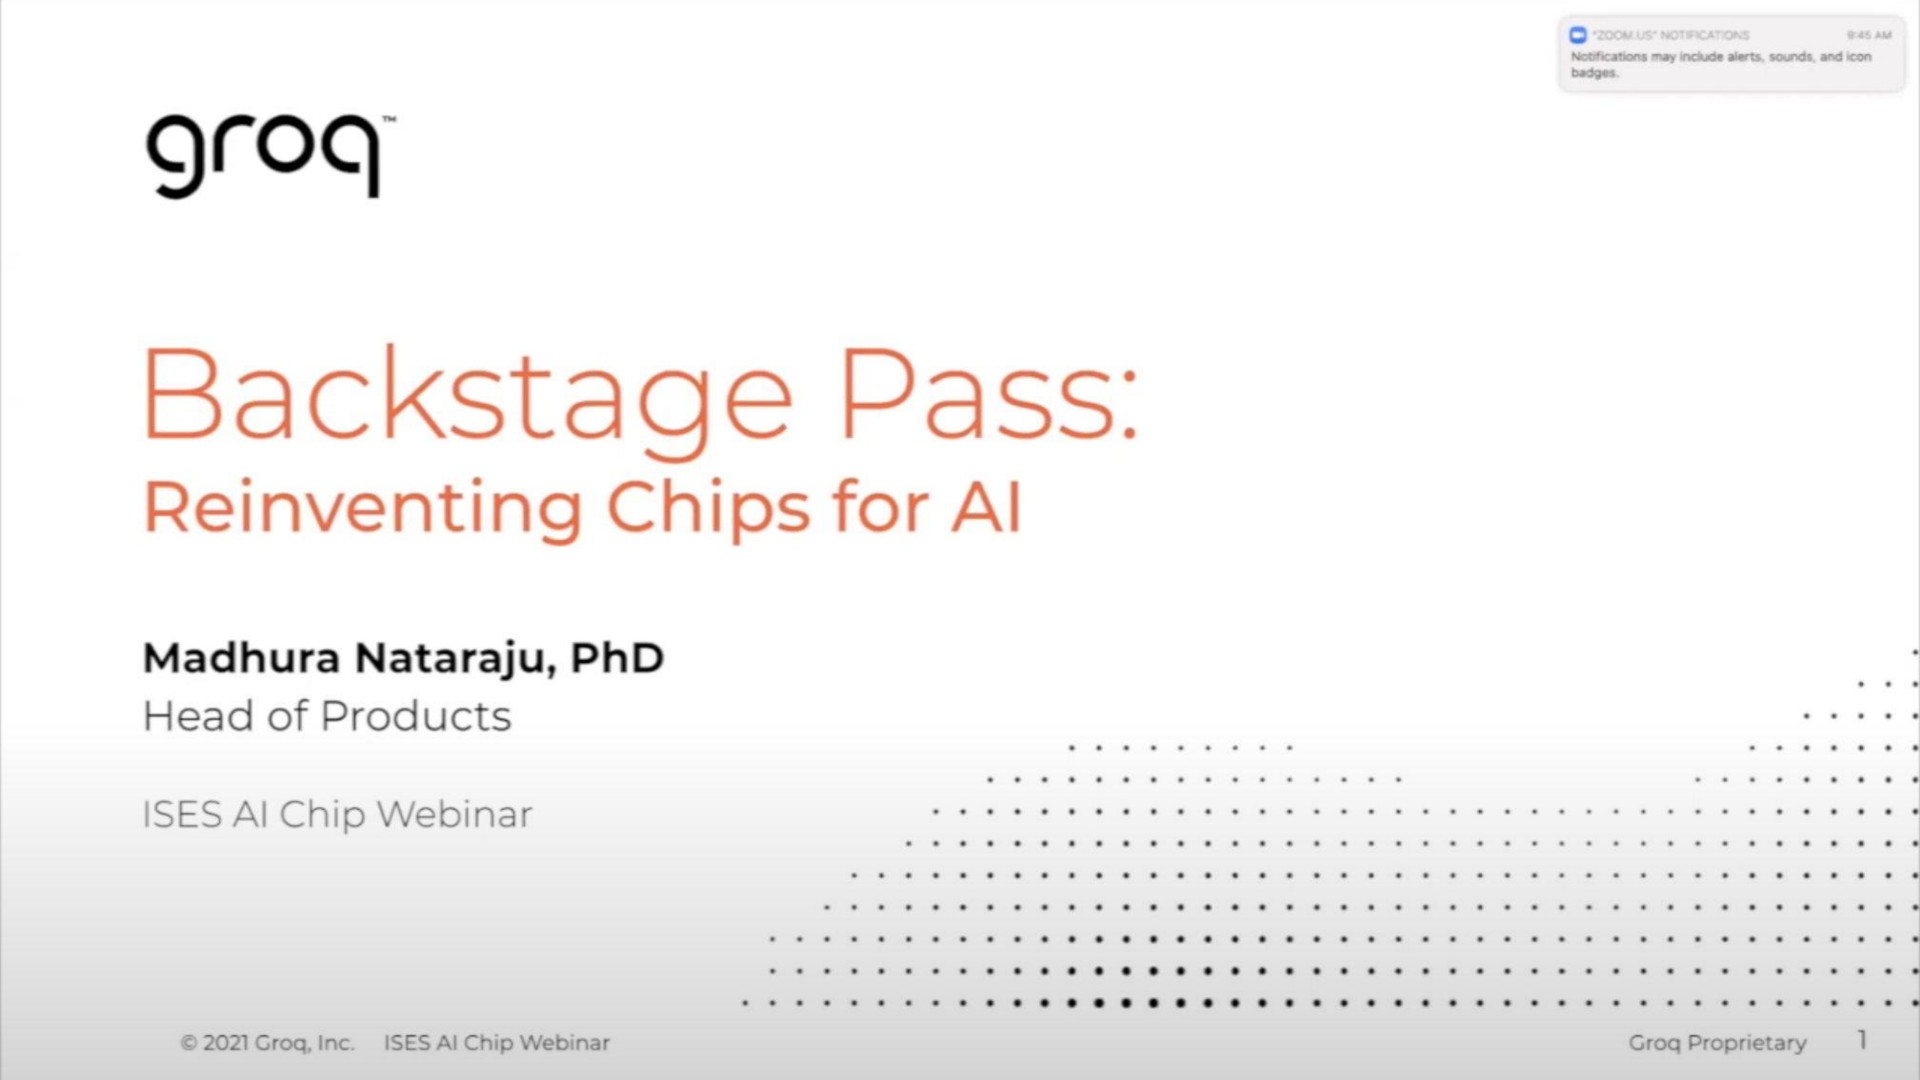 backstage pass reinventing chips for a | Groq